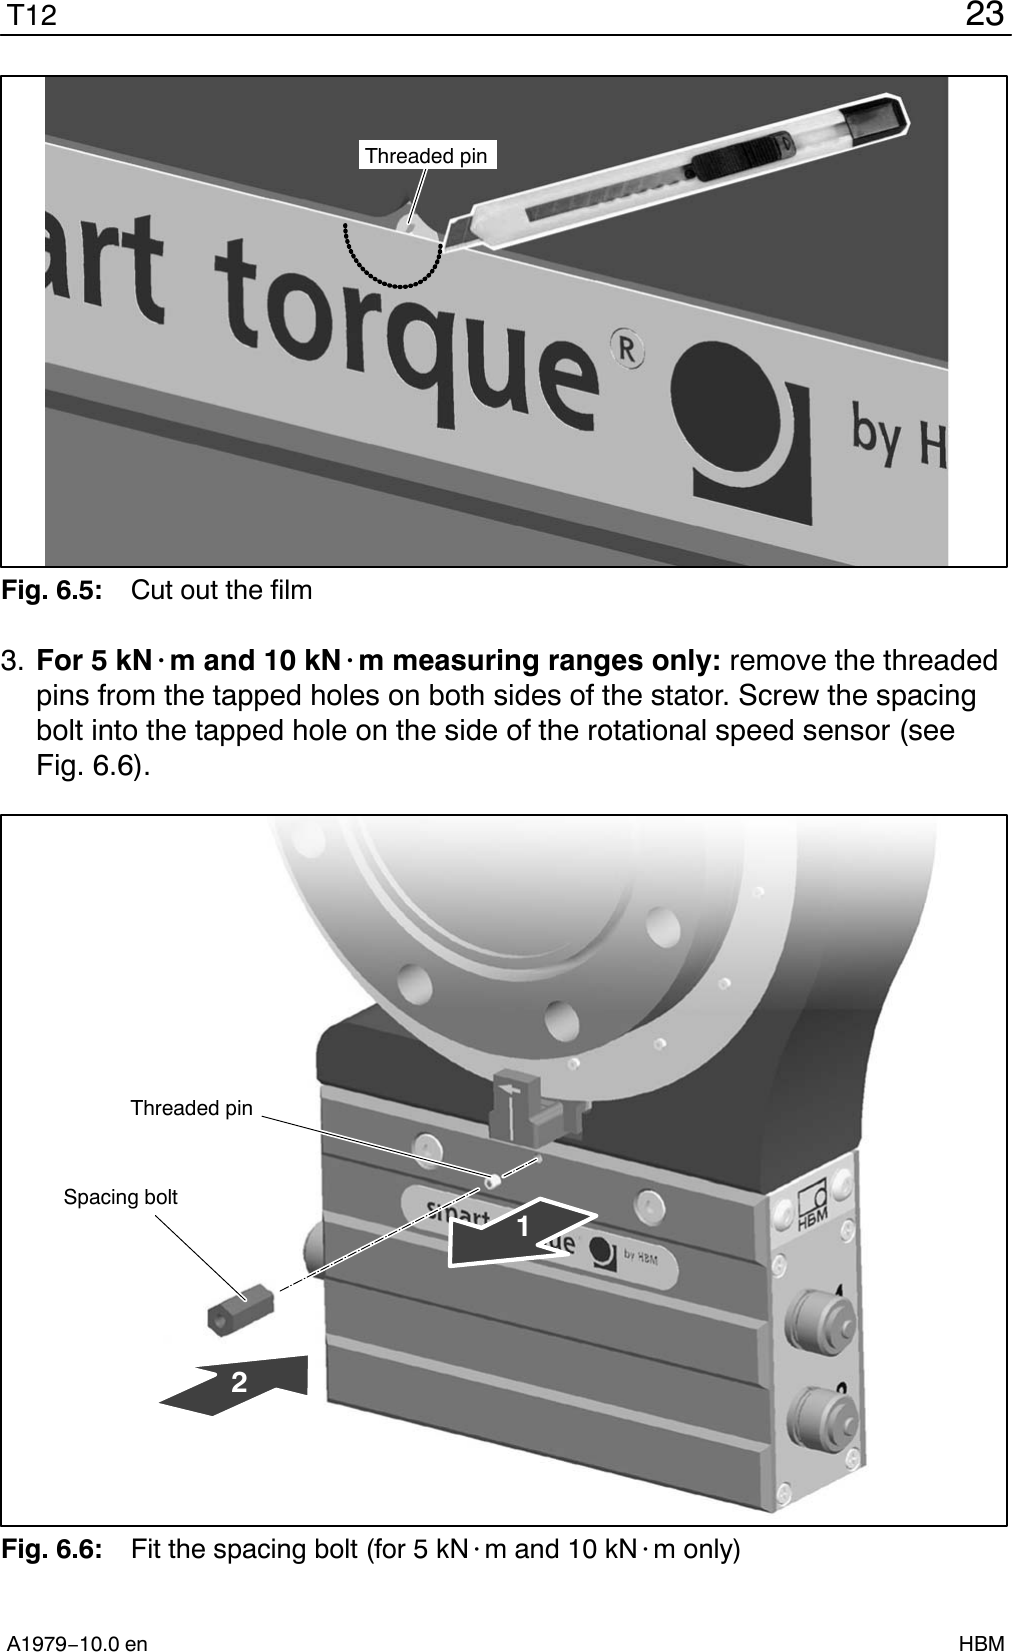 23T12A1979−10.0 en HBMThreaded pinFig. 6.5: Cut out the film3. For 5 kN@m and 10 kN@m measuring ranges only: remove the threadedpins from the tapped holes on both sides of the stator. Screw the spacingbolt into the tapped hole on the side of the rotational speed sensor (seeFig. 6.6).Spacing boltThreaded pin12Fig. 6.6: Fit the spacing bolt (for 5 kN@m and 10 kN@m only)